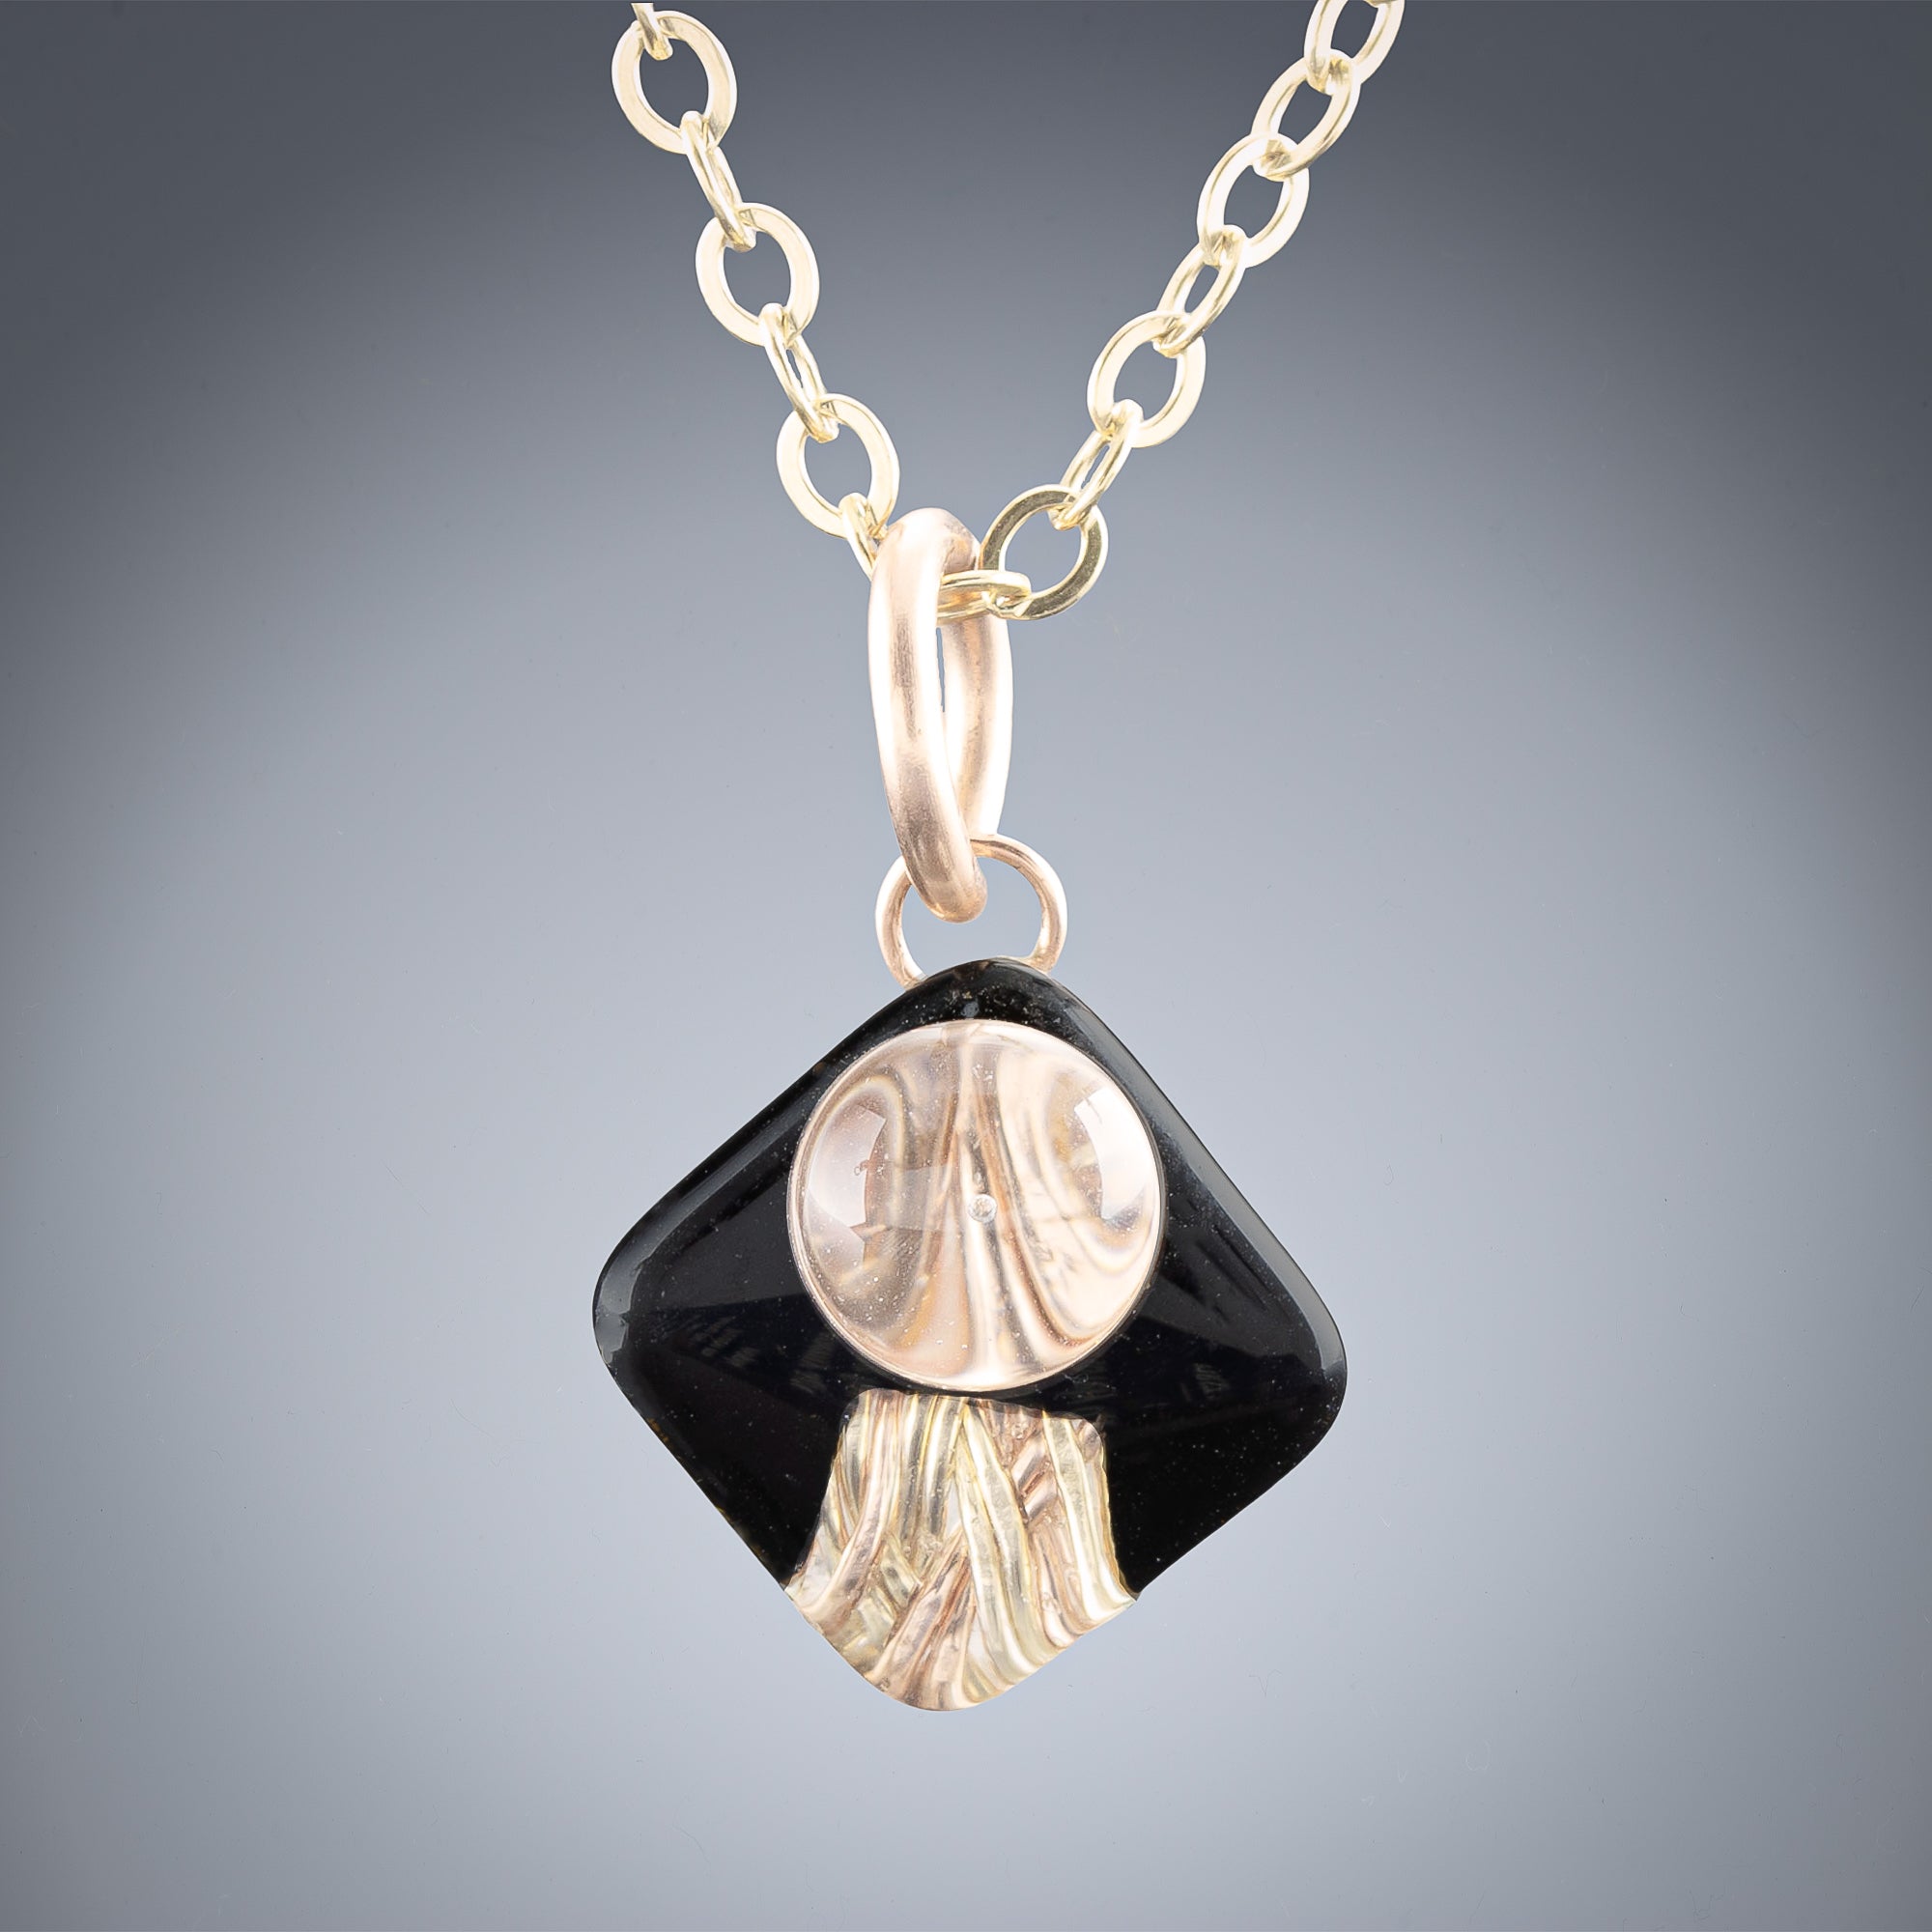 Small Black and Gold Art Deco Inspired Pendant Necklace in 14K Yellow and Rose Gold Fill